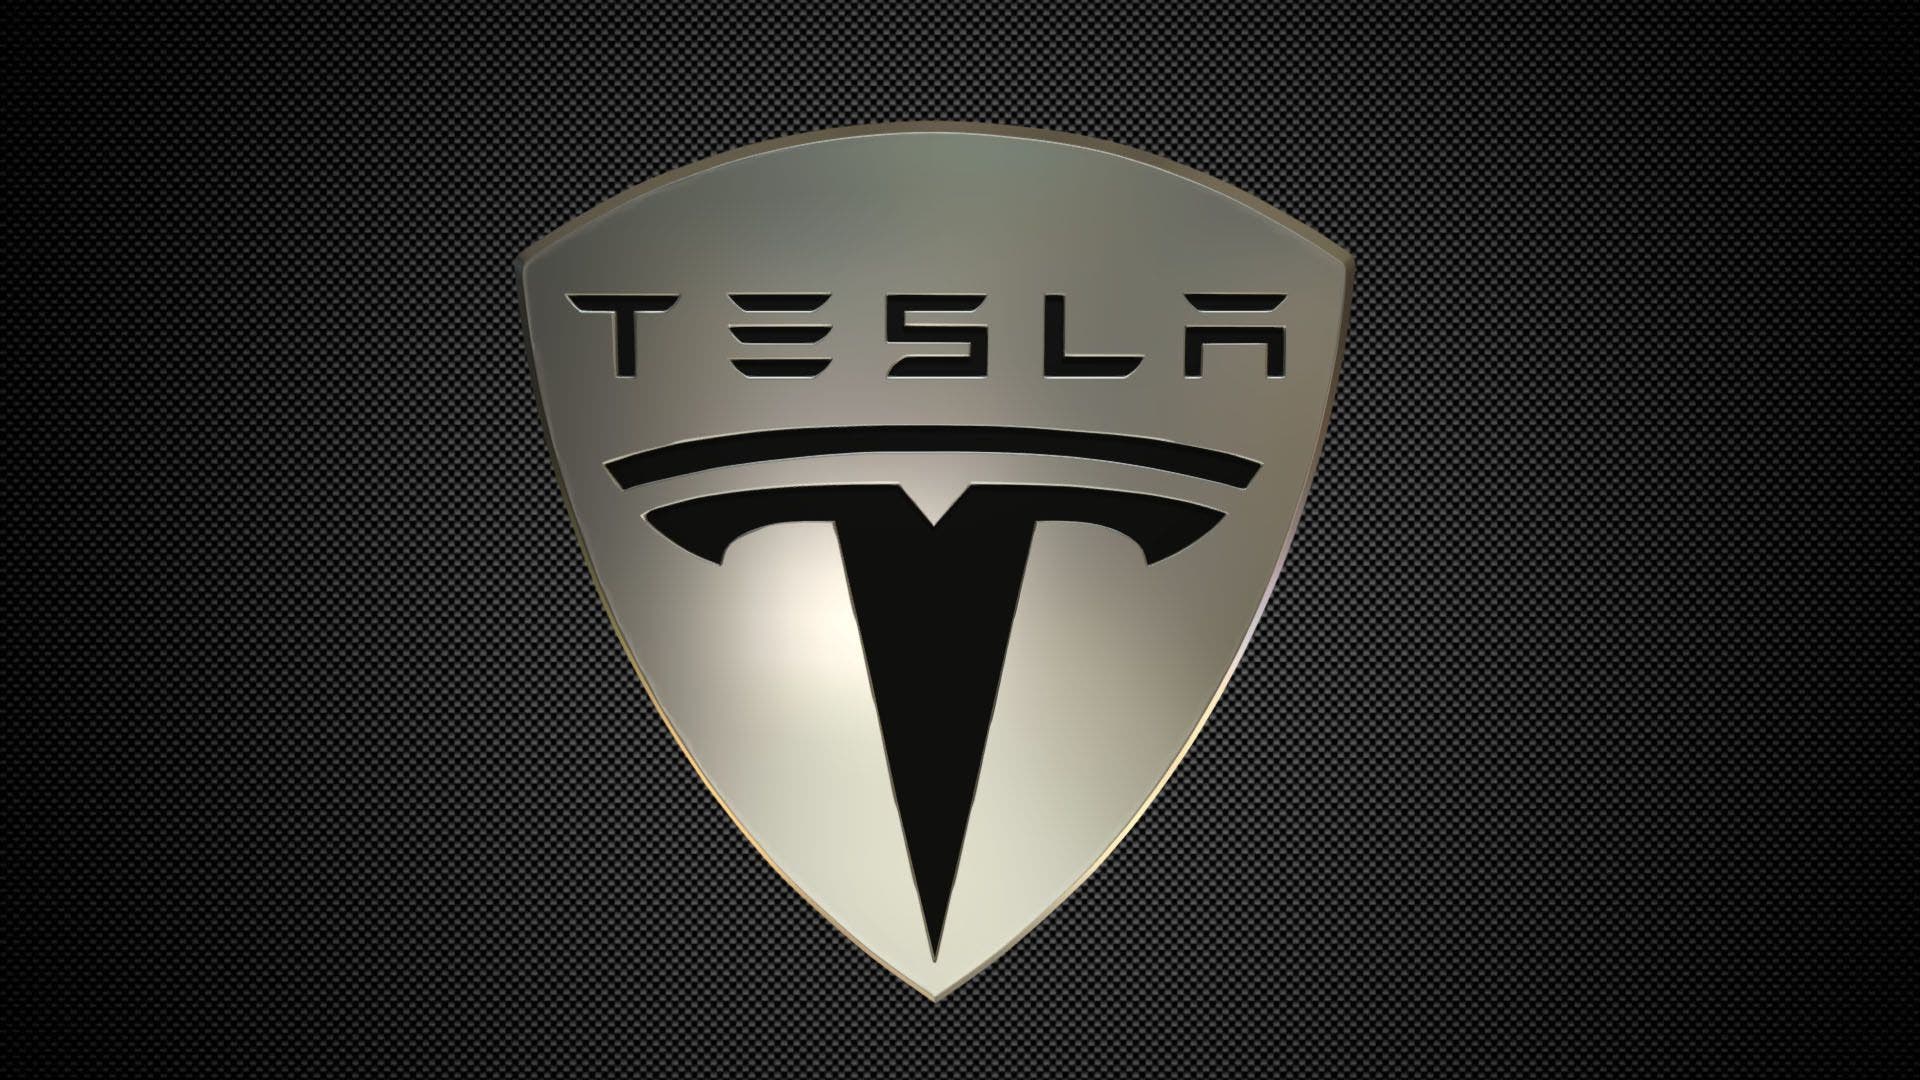 Tesla To $235? Here Are 10 Other Price Target Changes For Wednesday